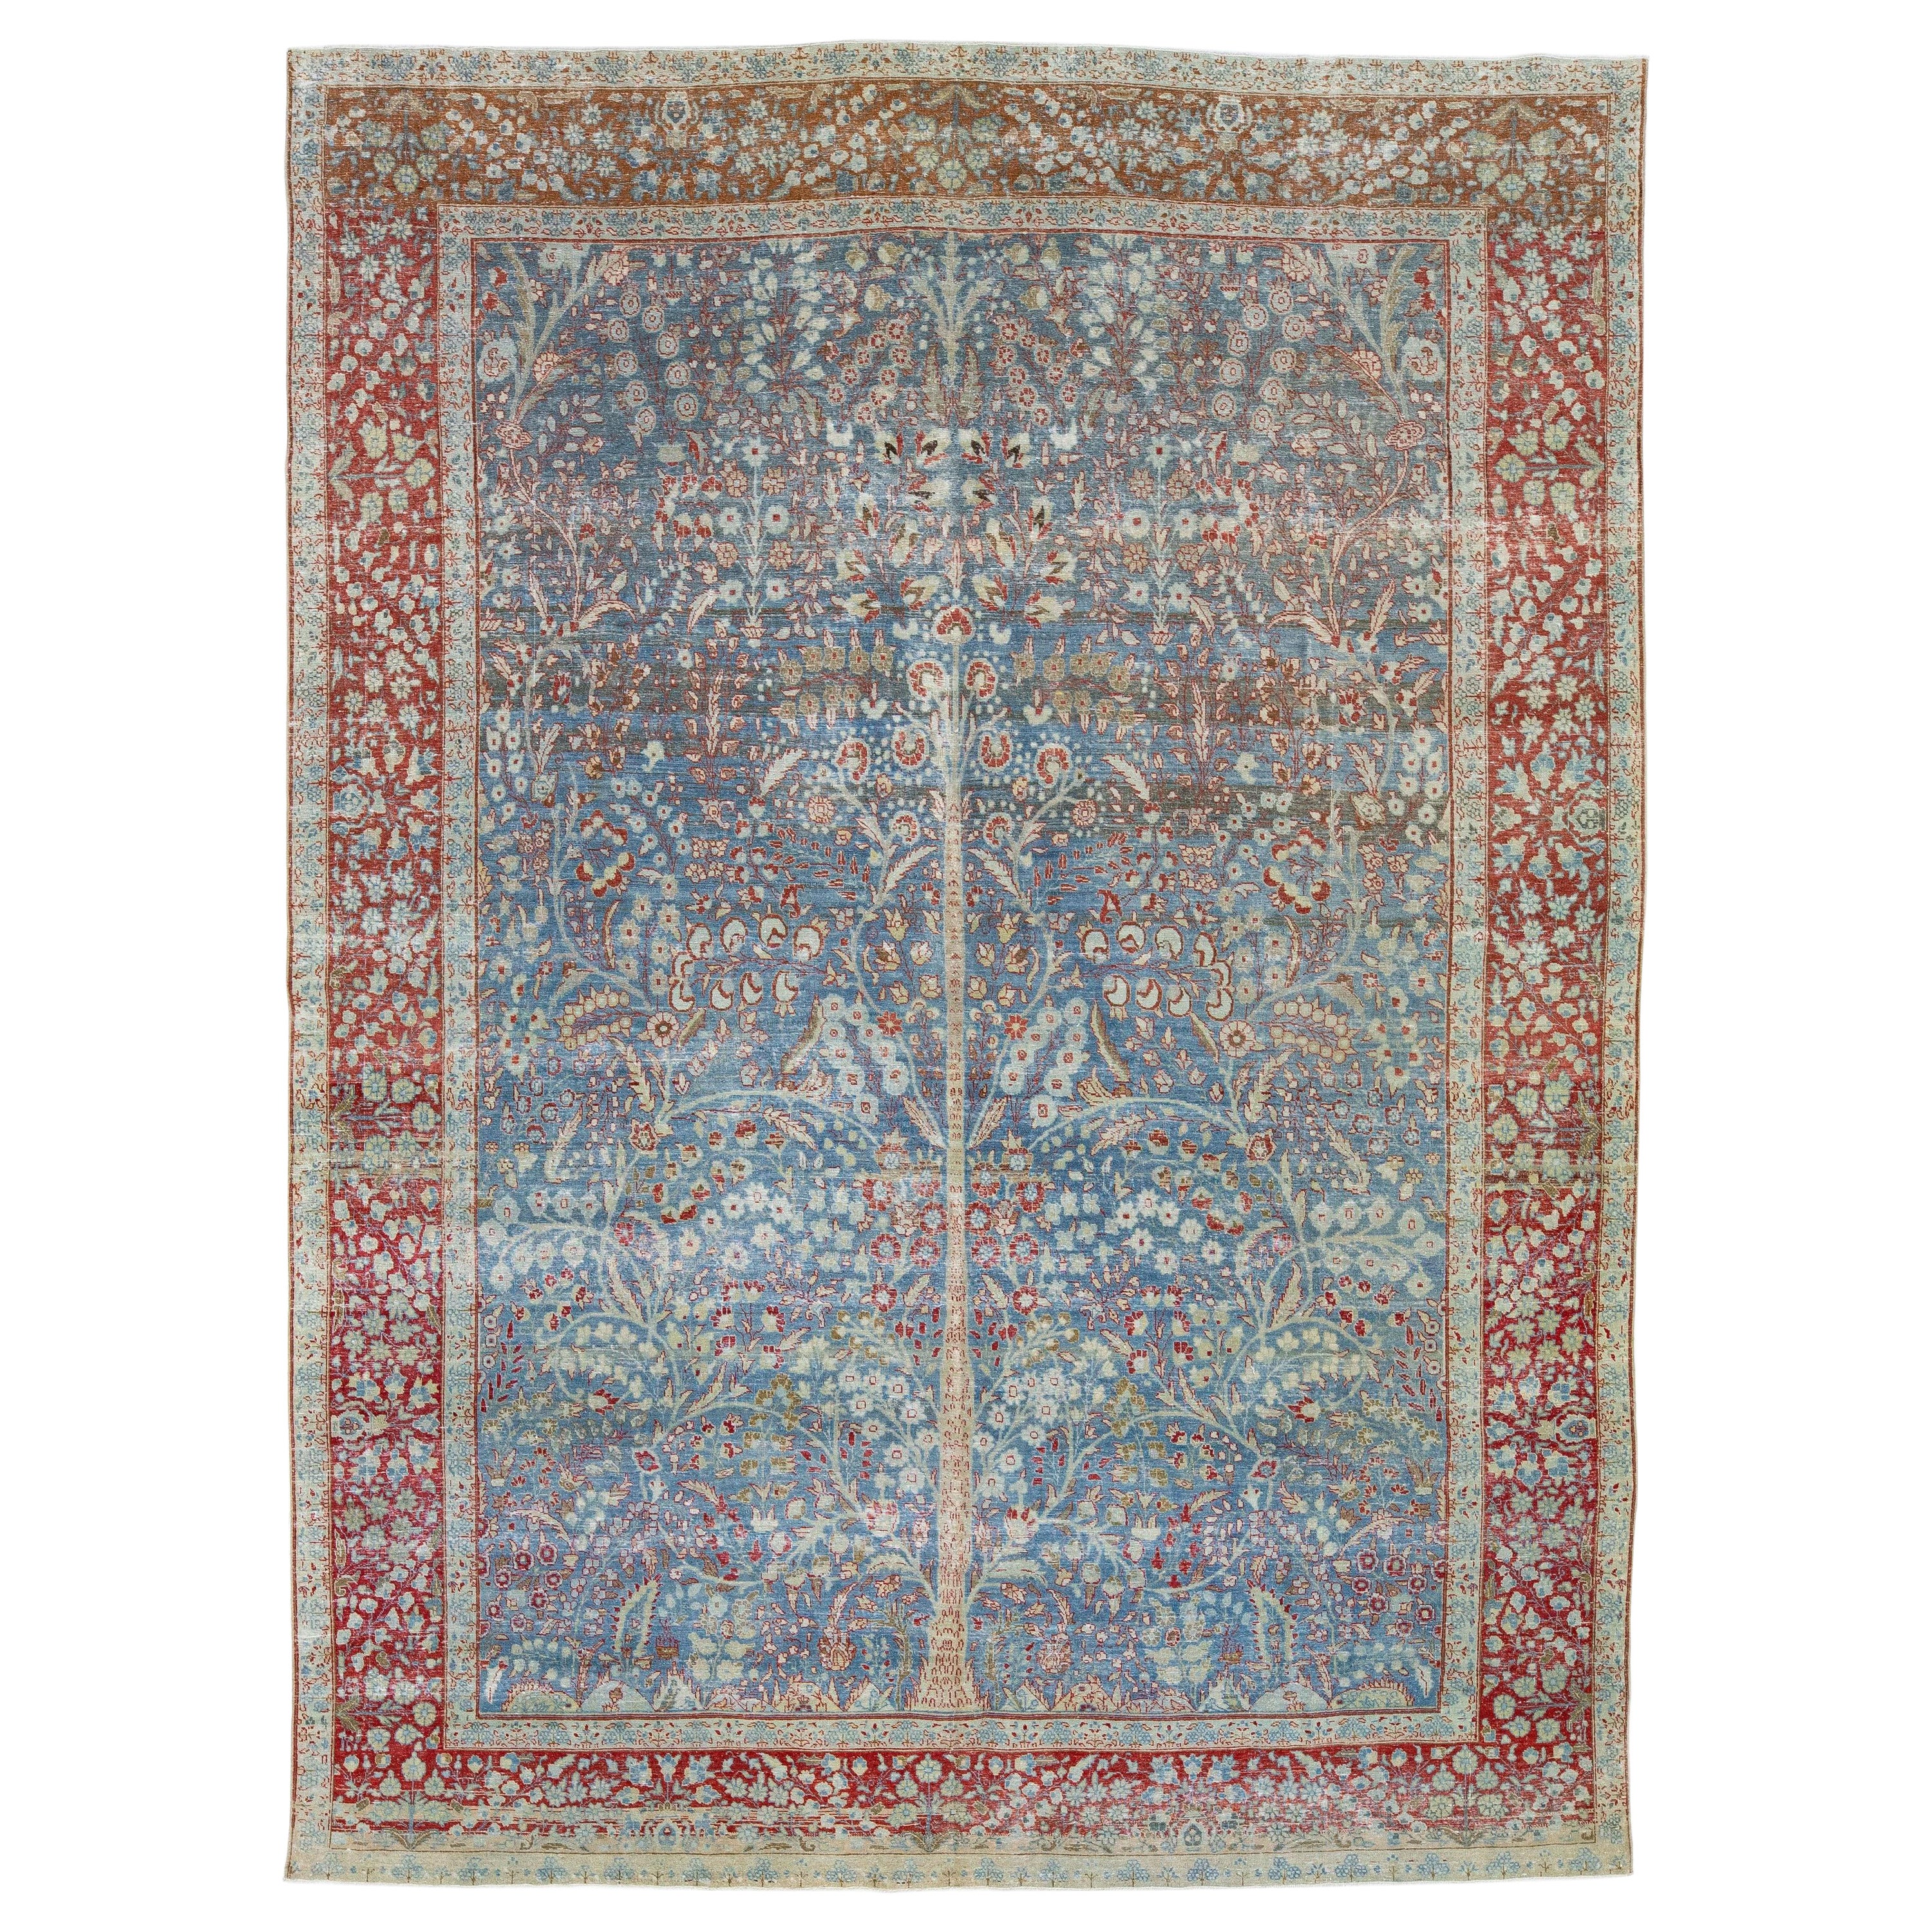 Antique Persian Tabriz Handmade Blue Wool Rug with Shah Abbasi Design For Sale